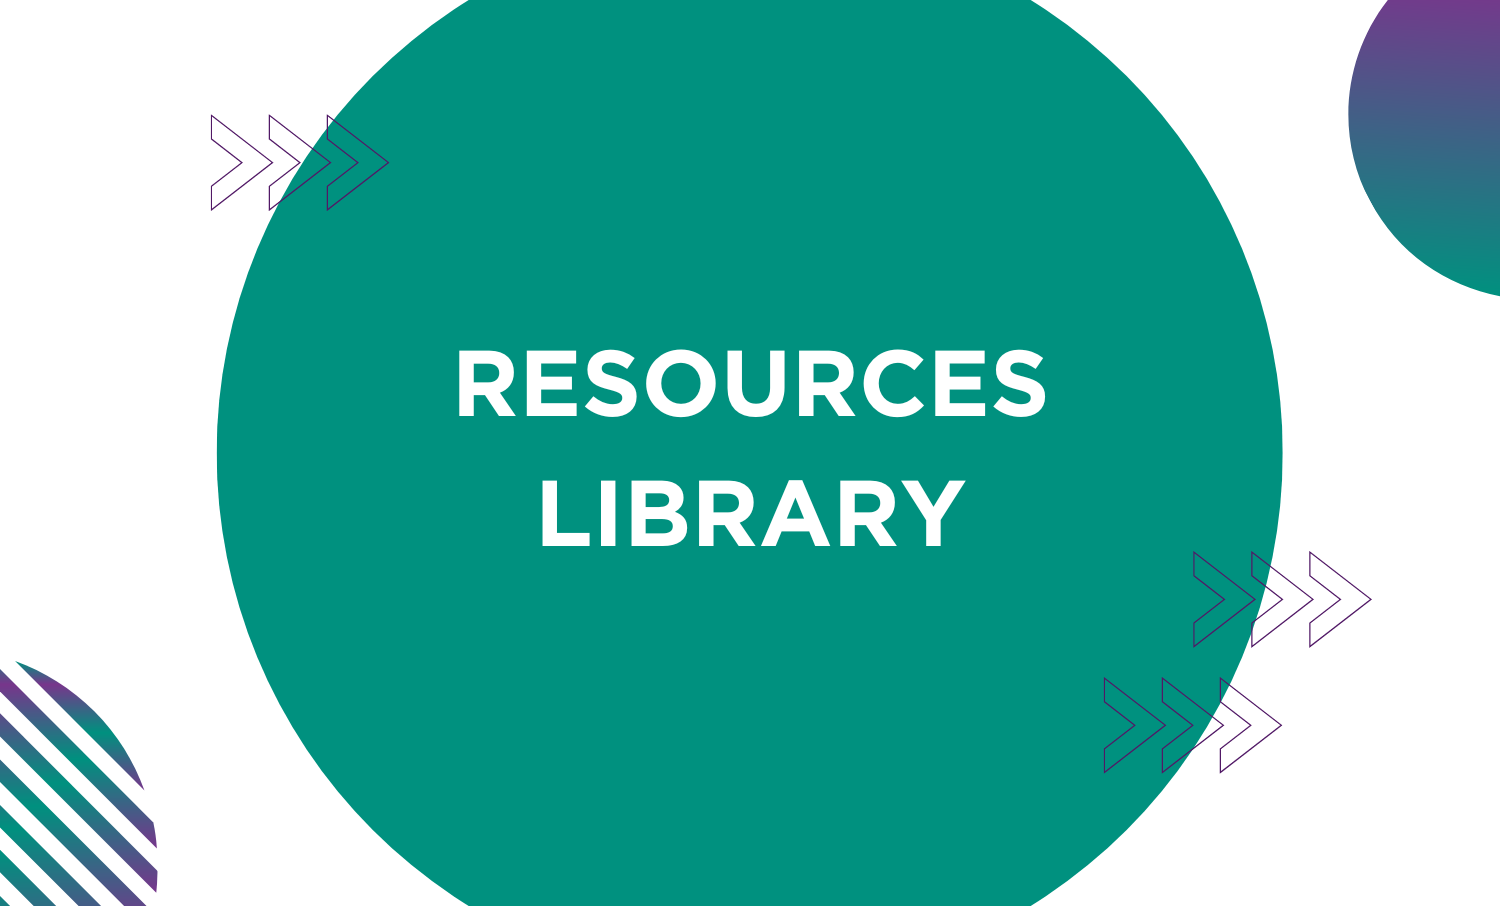 Resources Library inside purple circle